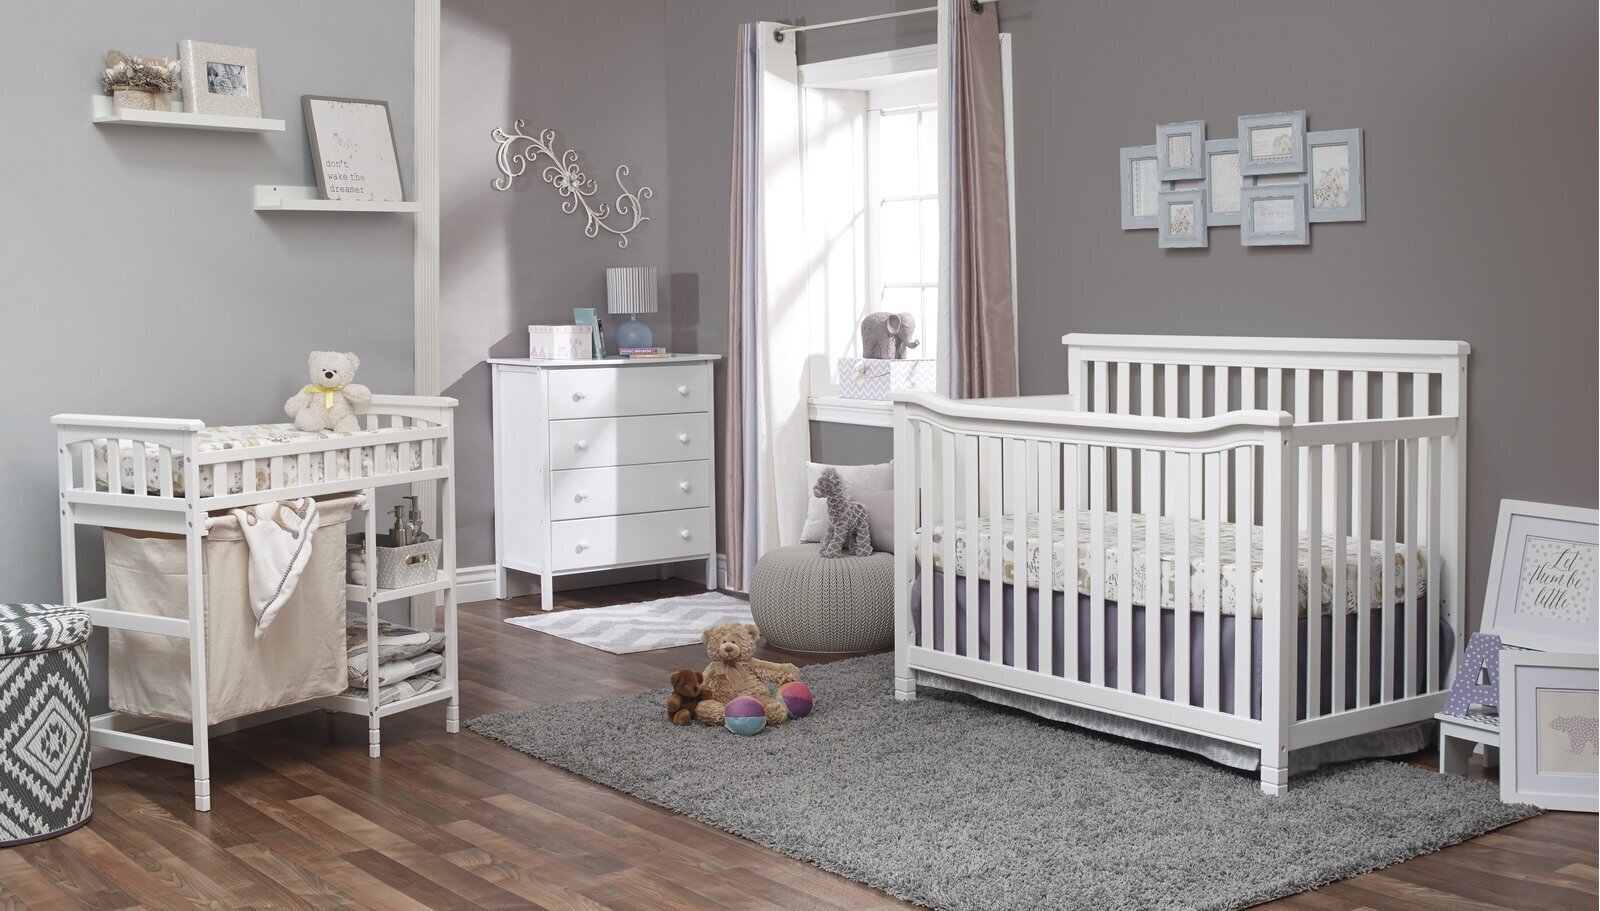 5 piece crib furniture set in white and natural wood